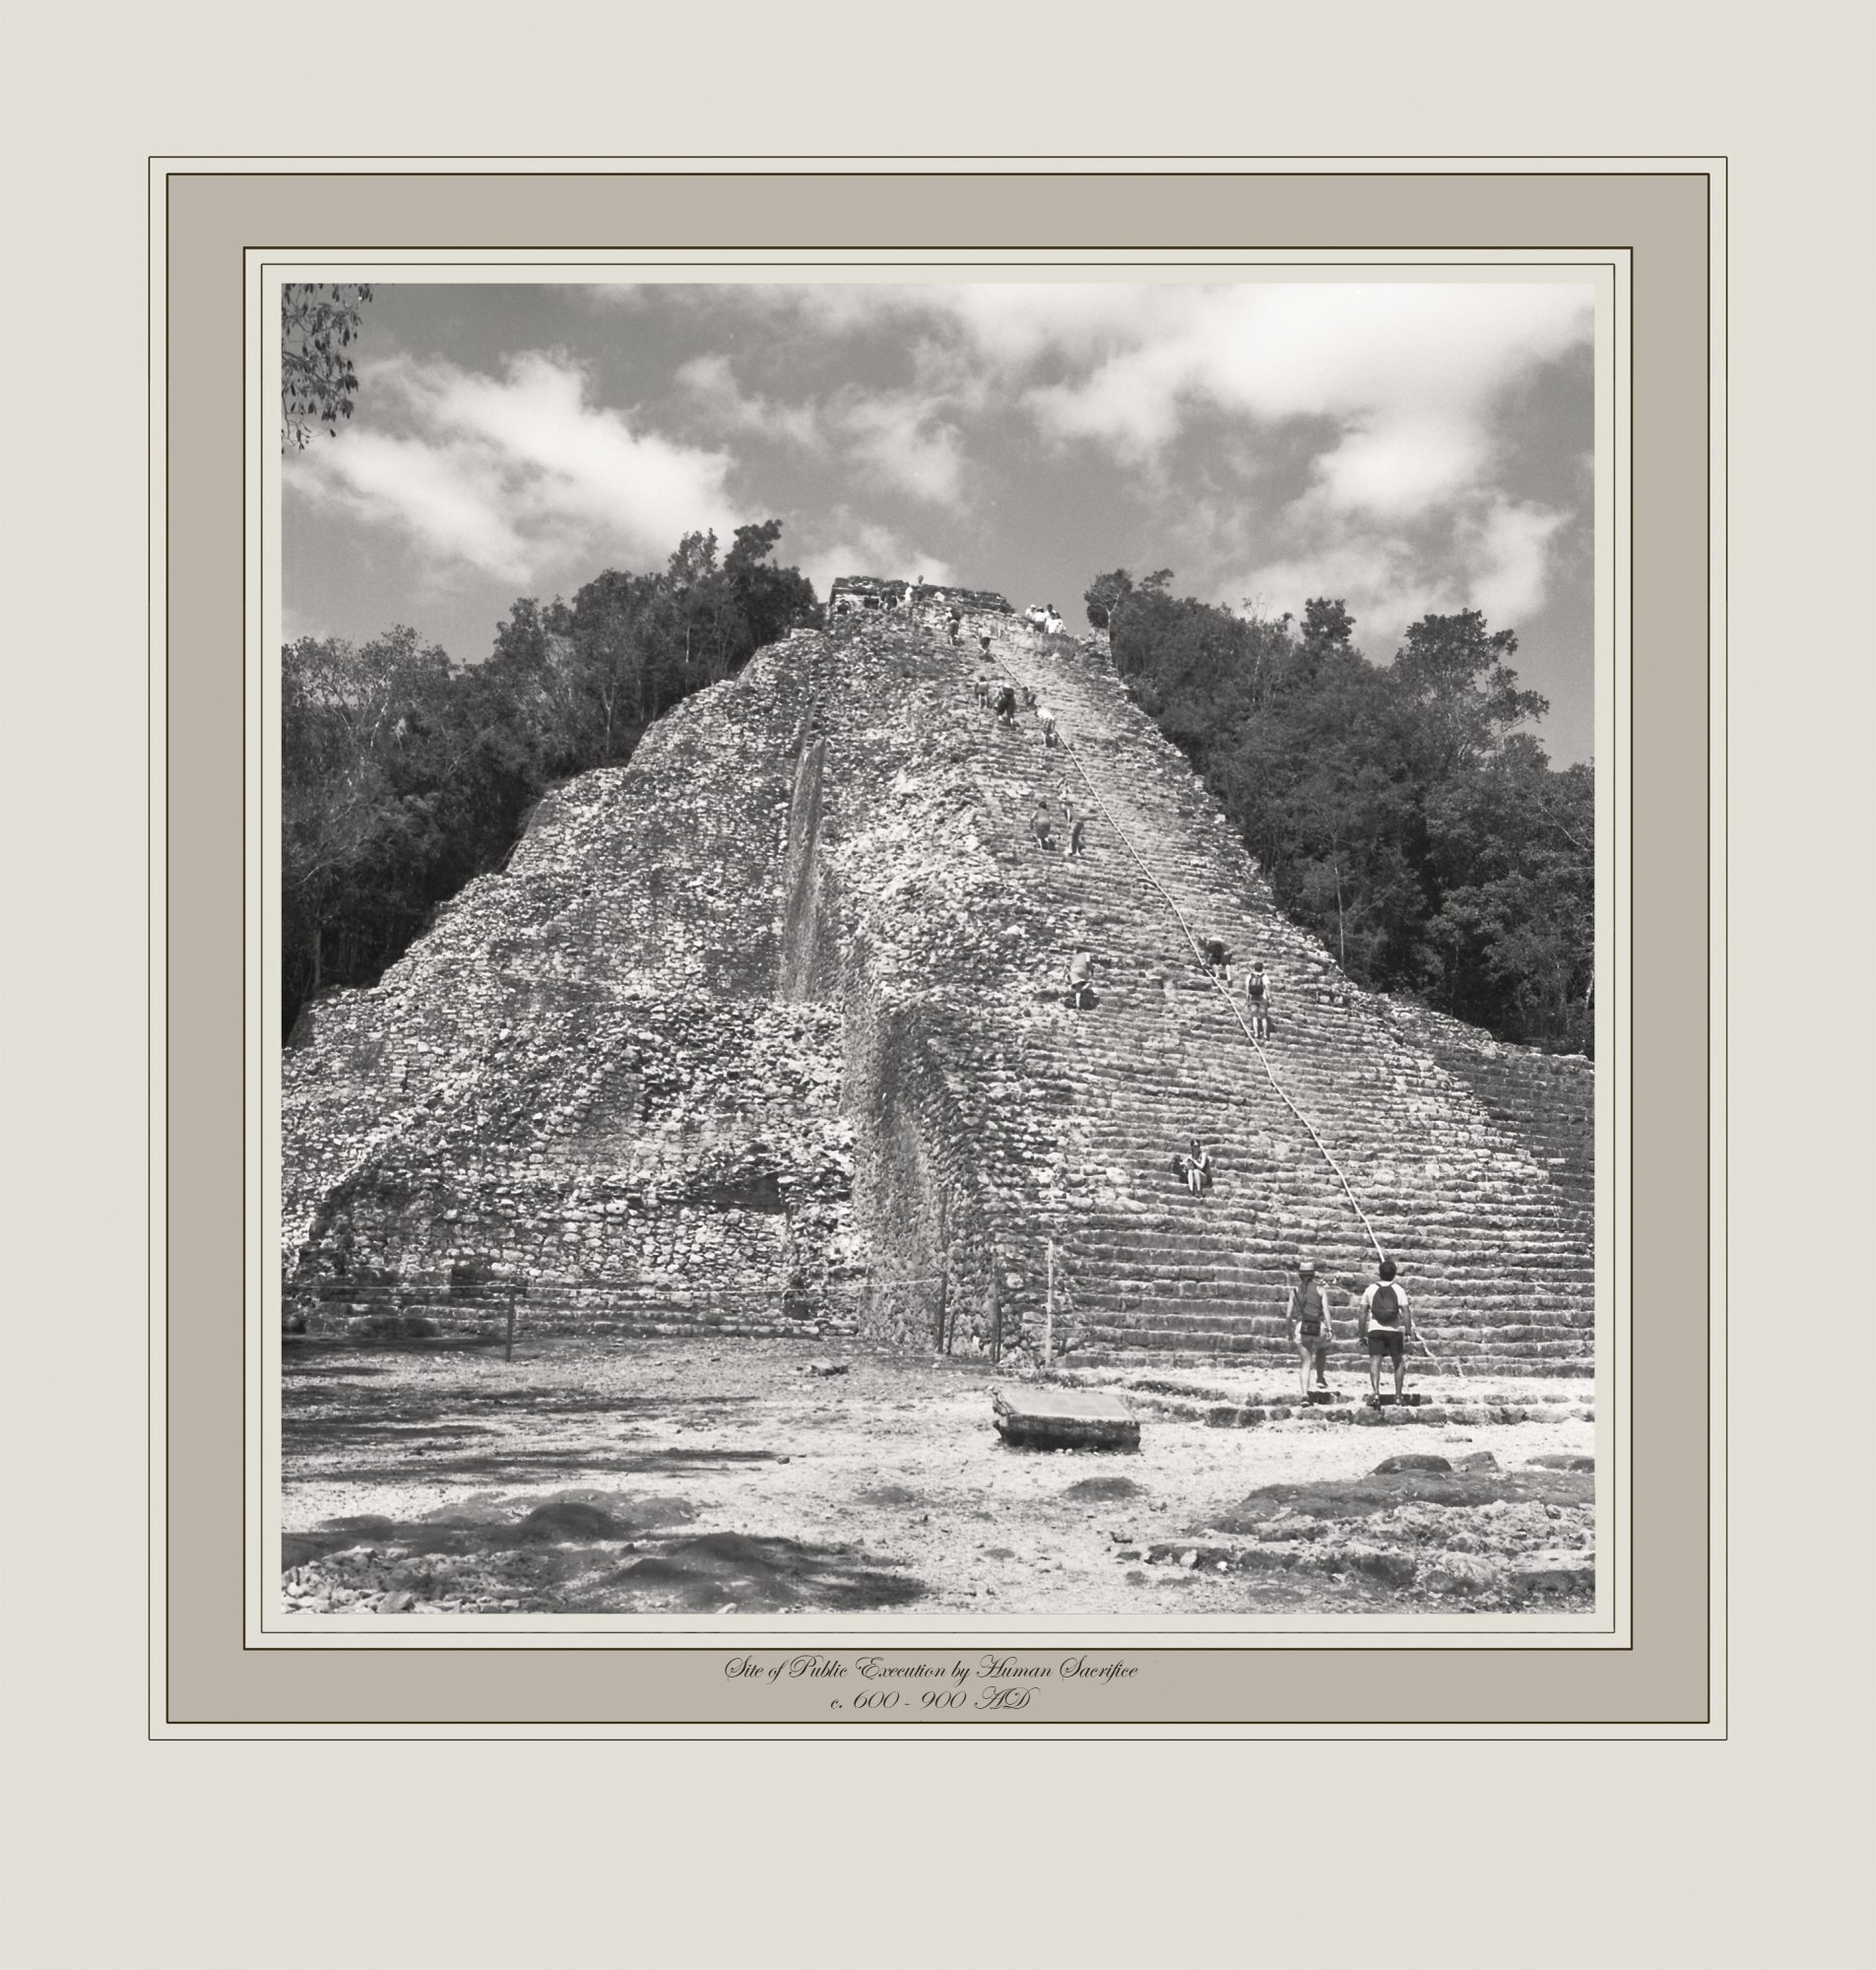 Site of Public Executions by Human Sacrifice c. 600-900 AD (Nohuch Mul Pyramid, Coba, Mexico)